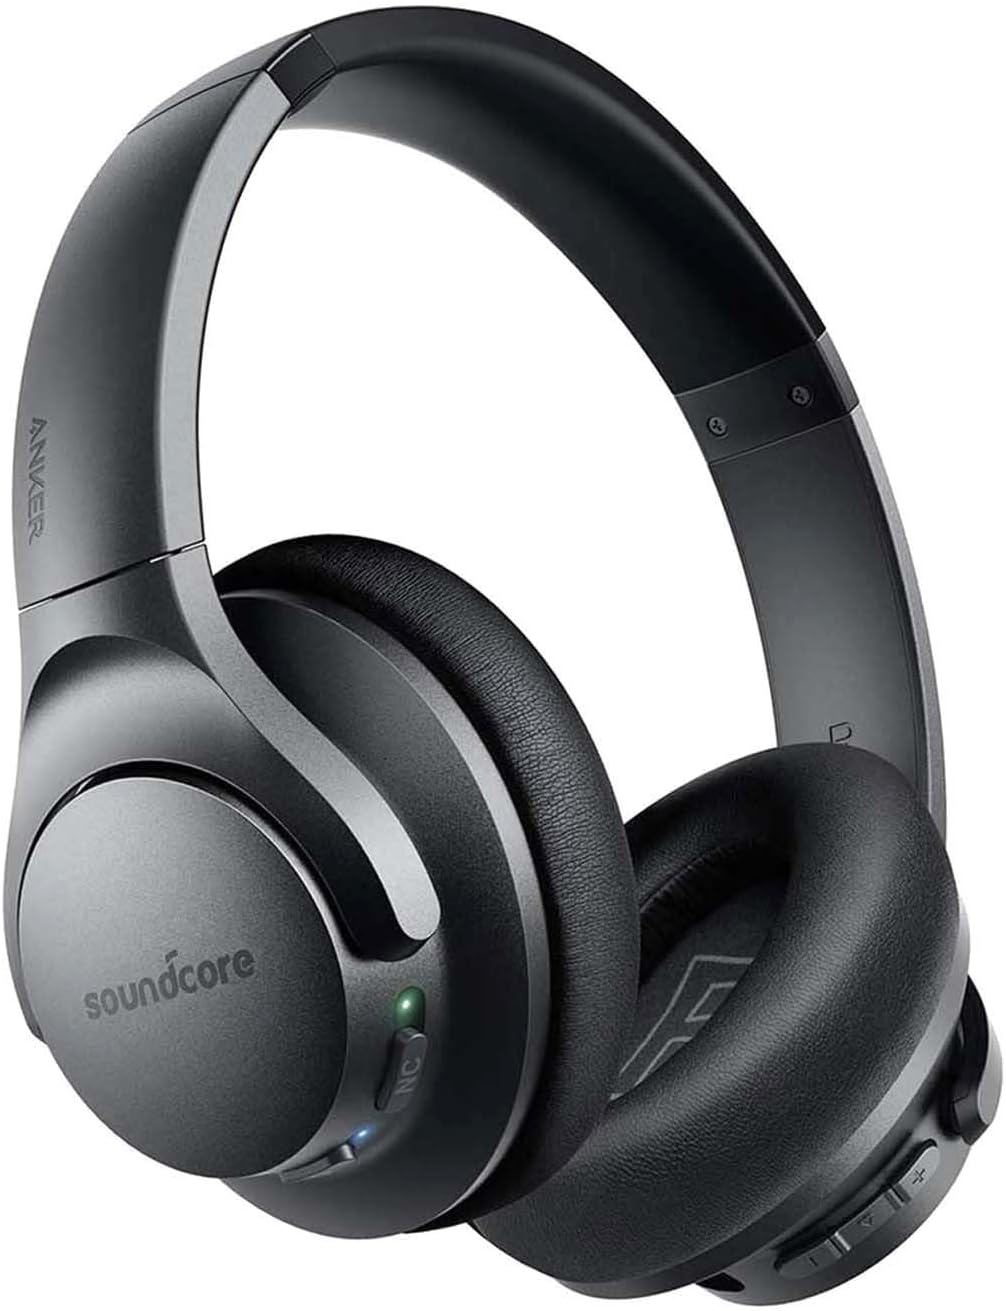 Update Dec 2023- These headphones are still as awesome as the day I received them in 2019! Ankar is truly hard to beat. Just in case youre looking for a pair I can vouch for the quality of these.Ive had these headphones since end of December 2019, gotten for flight over the holidays. Tried out both Bose noice Cancelling headphones at local brick & mortar store, but the price caused me to pause. On to Amazon where I found these, better price, would arrive before my flight, sounded like a deal w